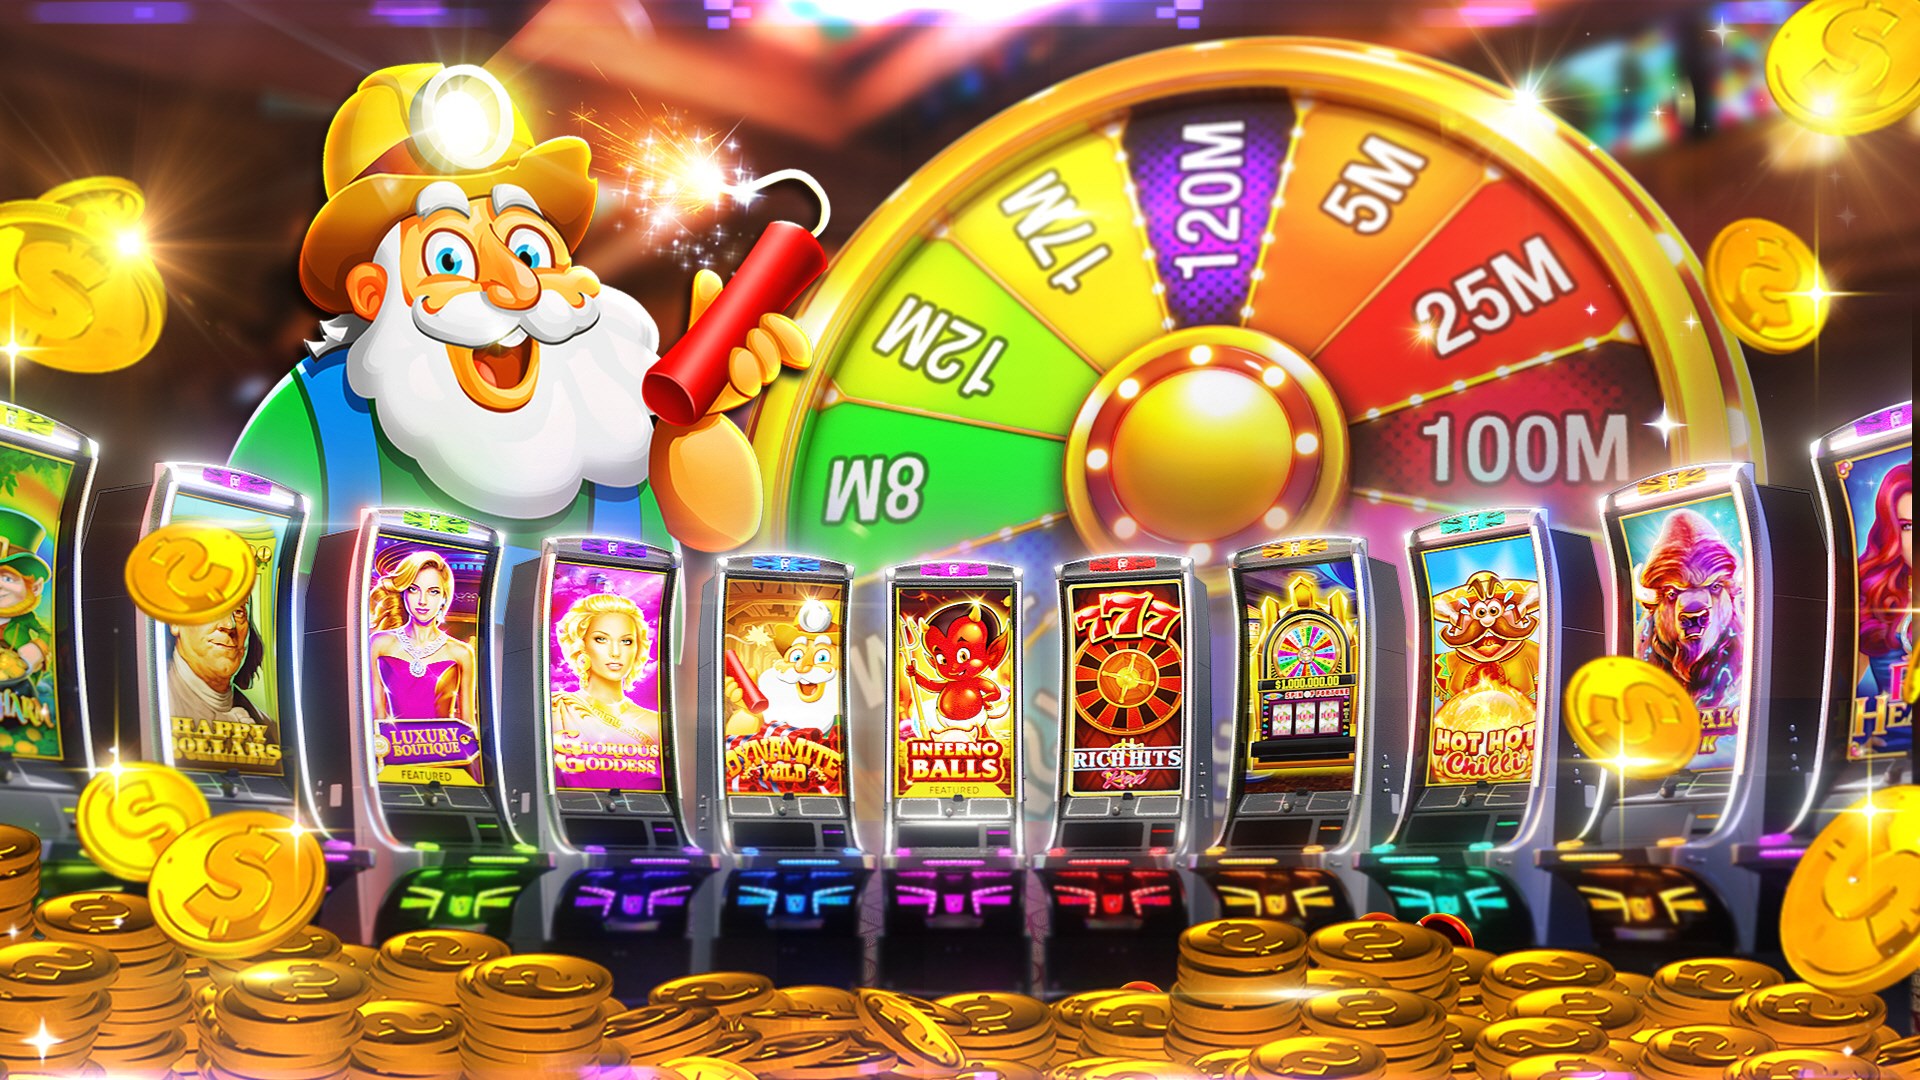 Dewa Slot Online: A Guide to the Most Popular and Gacor Slots in 2023